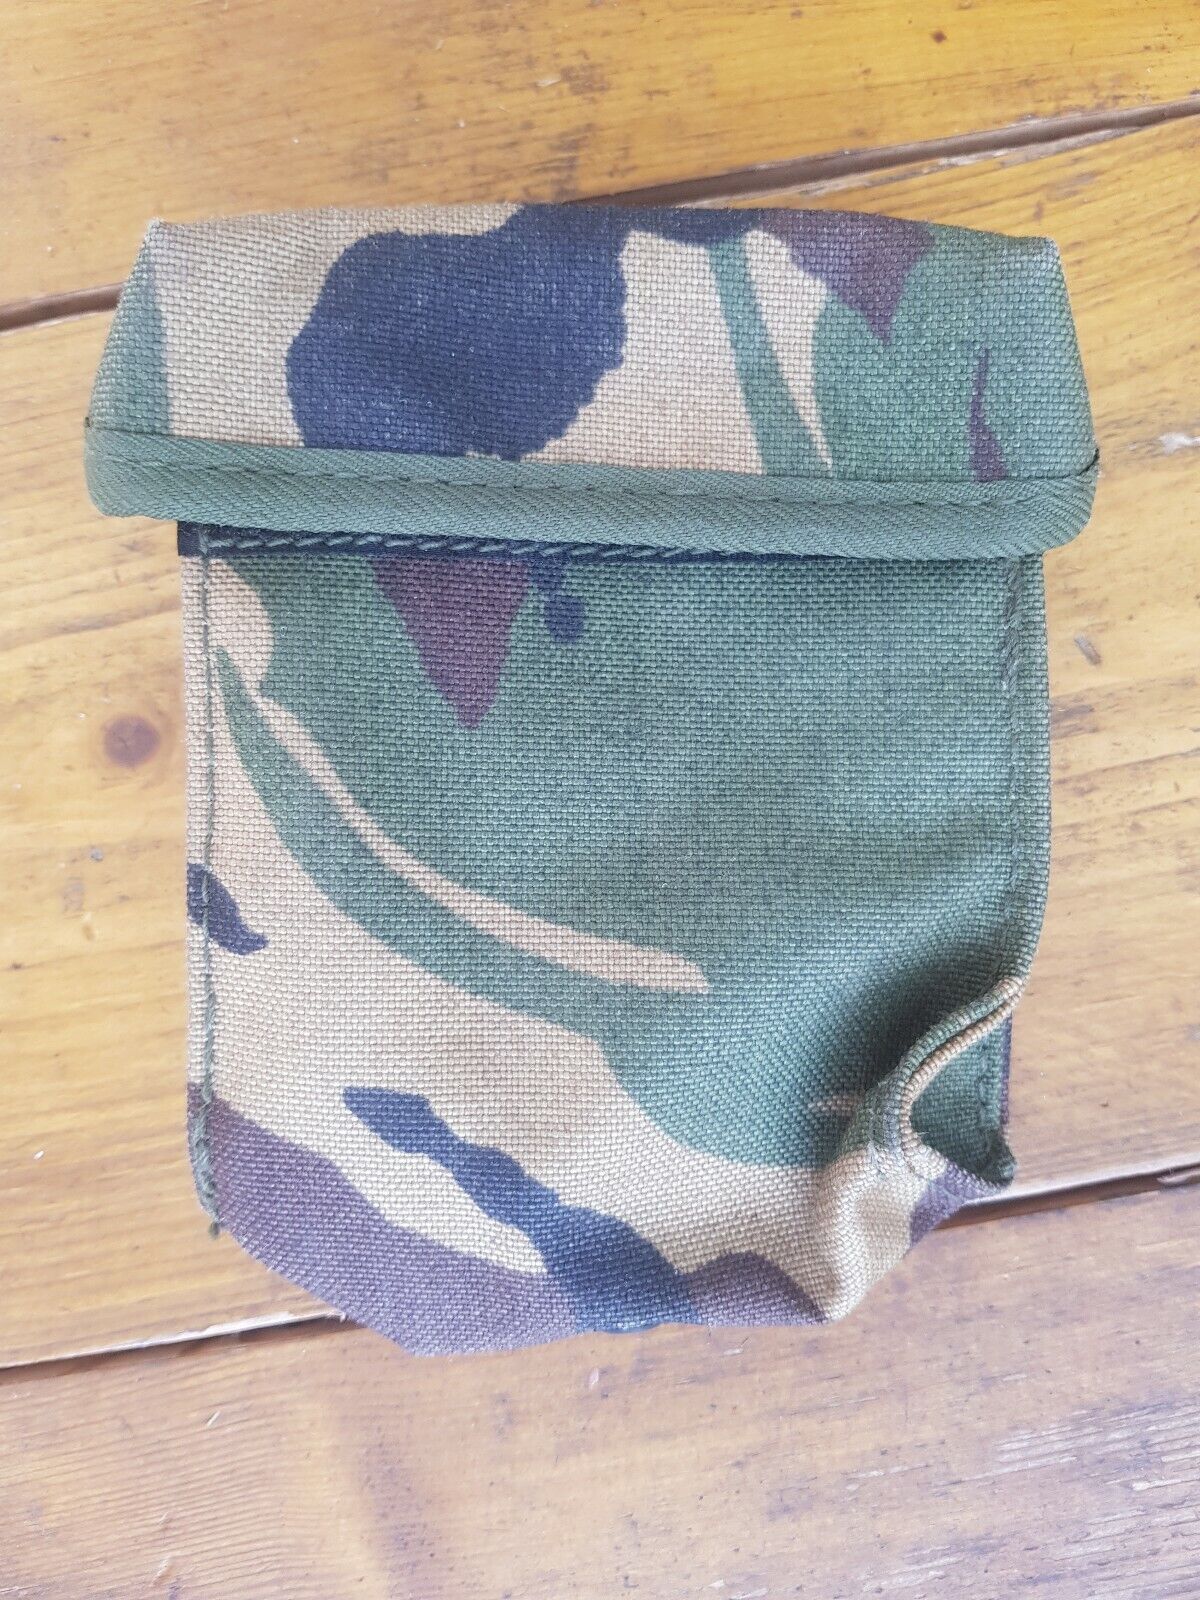 Dutch Army Small Ammunition Pouch - Woodland DPM Camouflage Grade 1 - ALICE Type